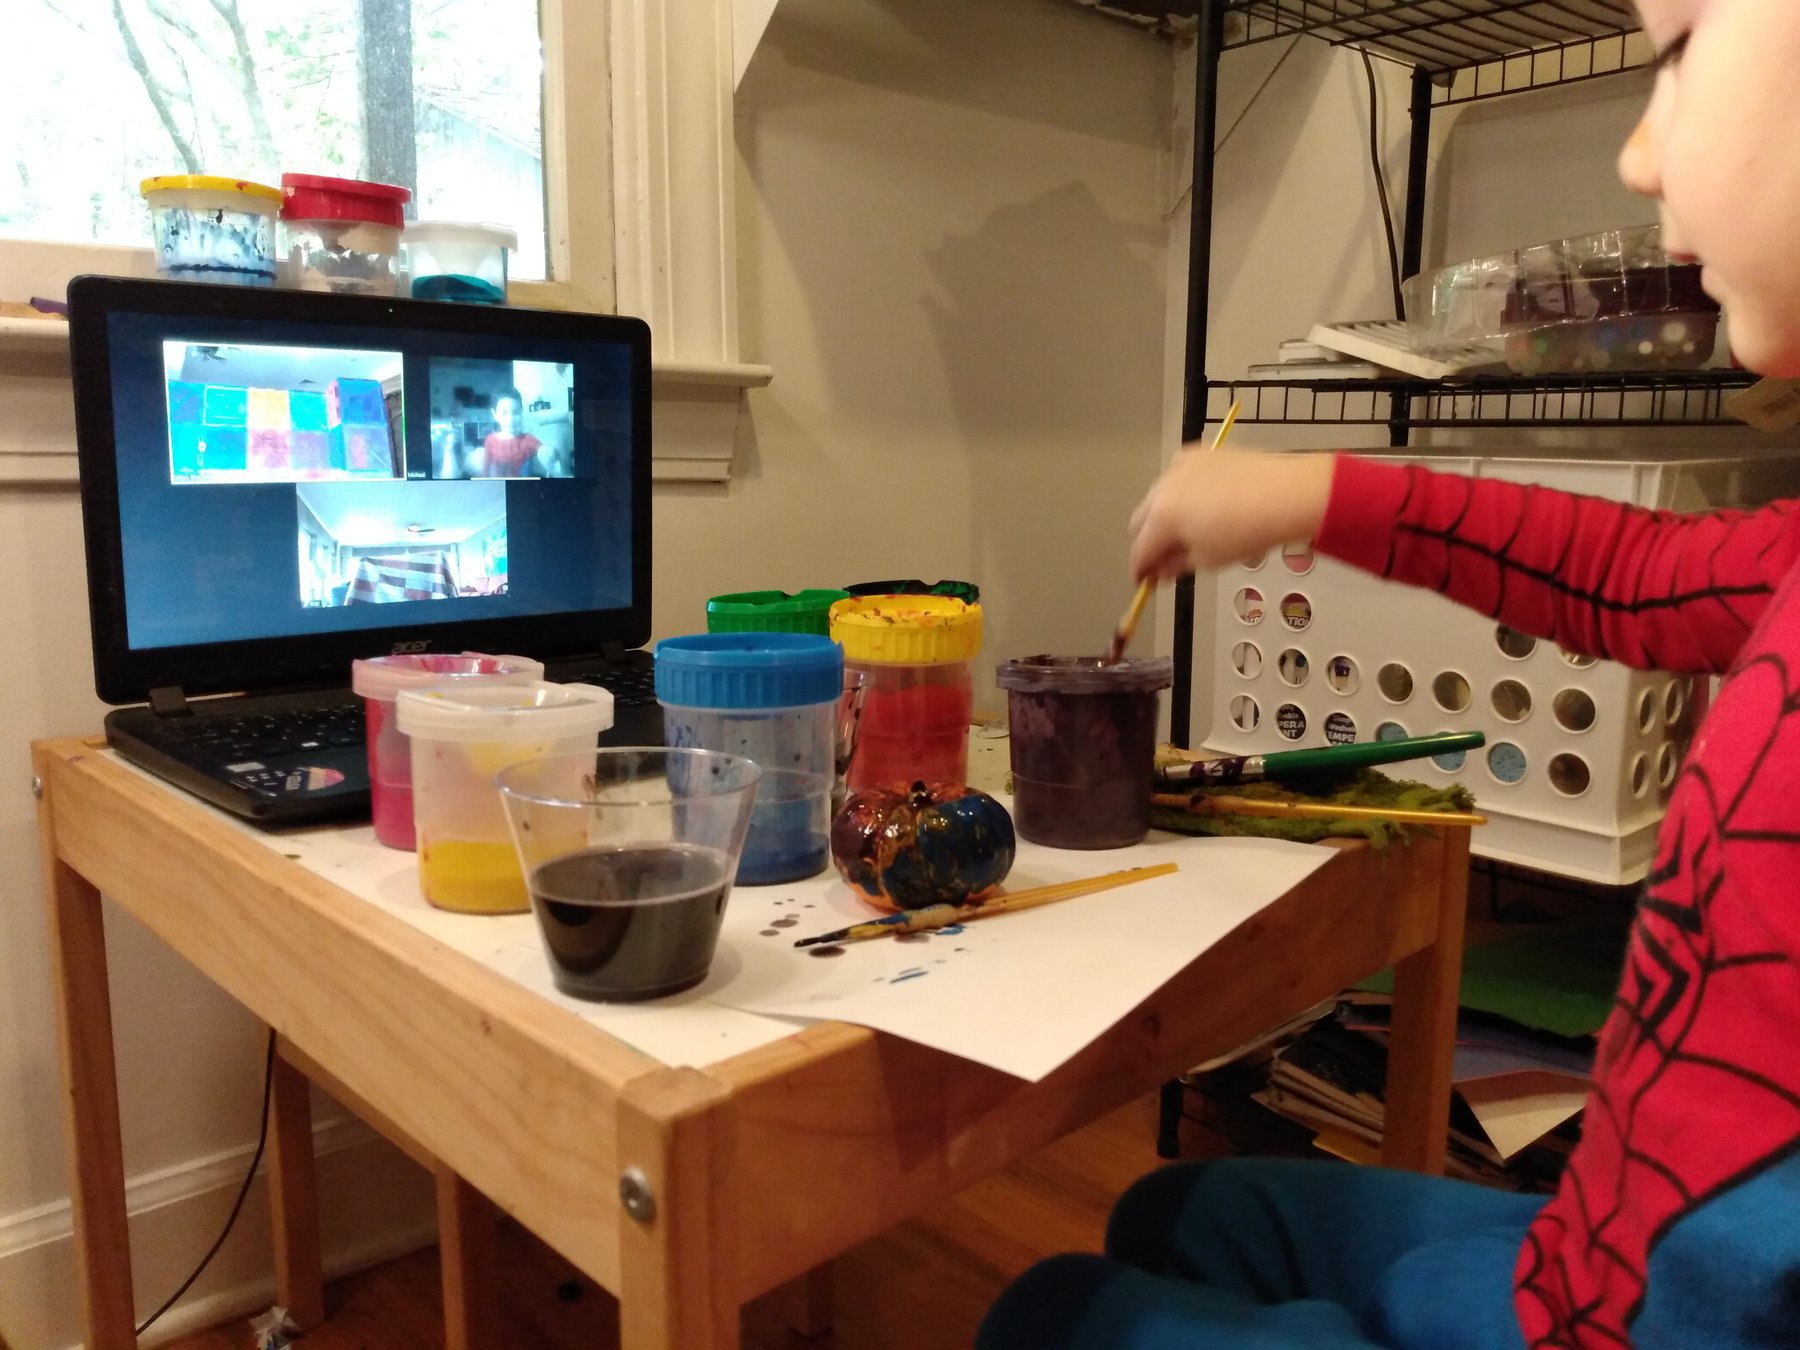 A white boy in Spider-Man pajamas paints while a laptop in front of him displays a video call with other young children.